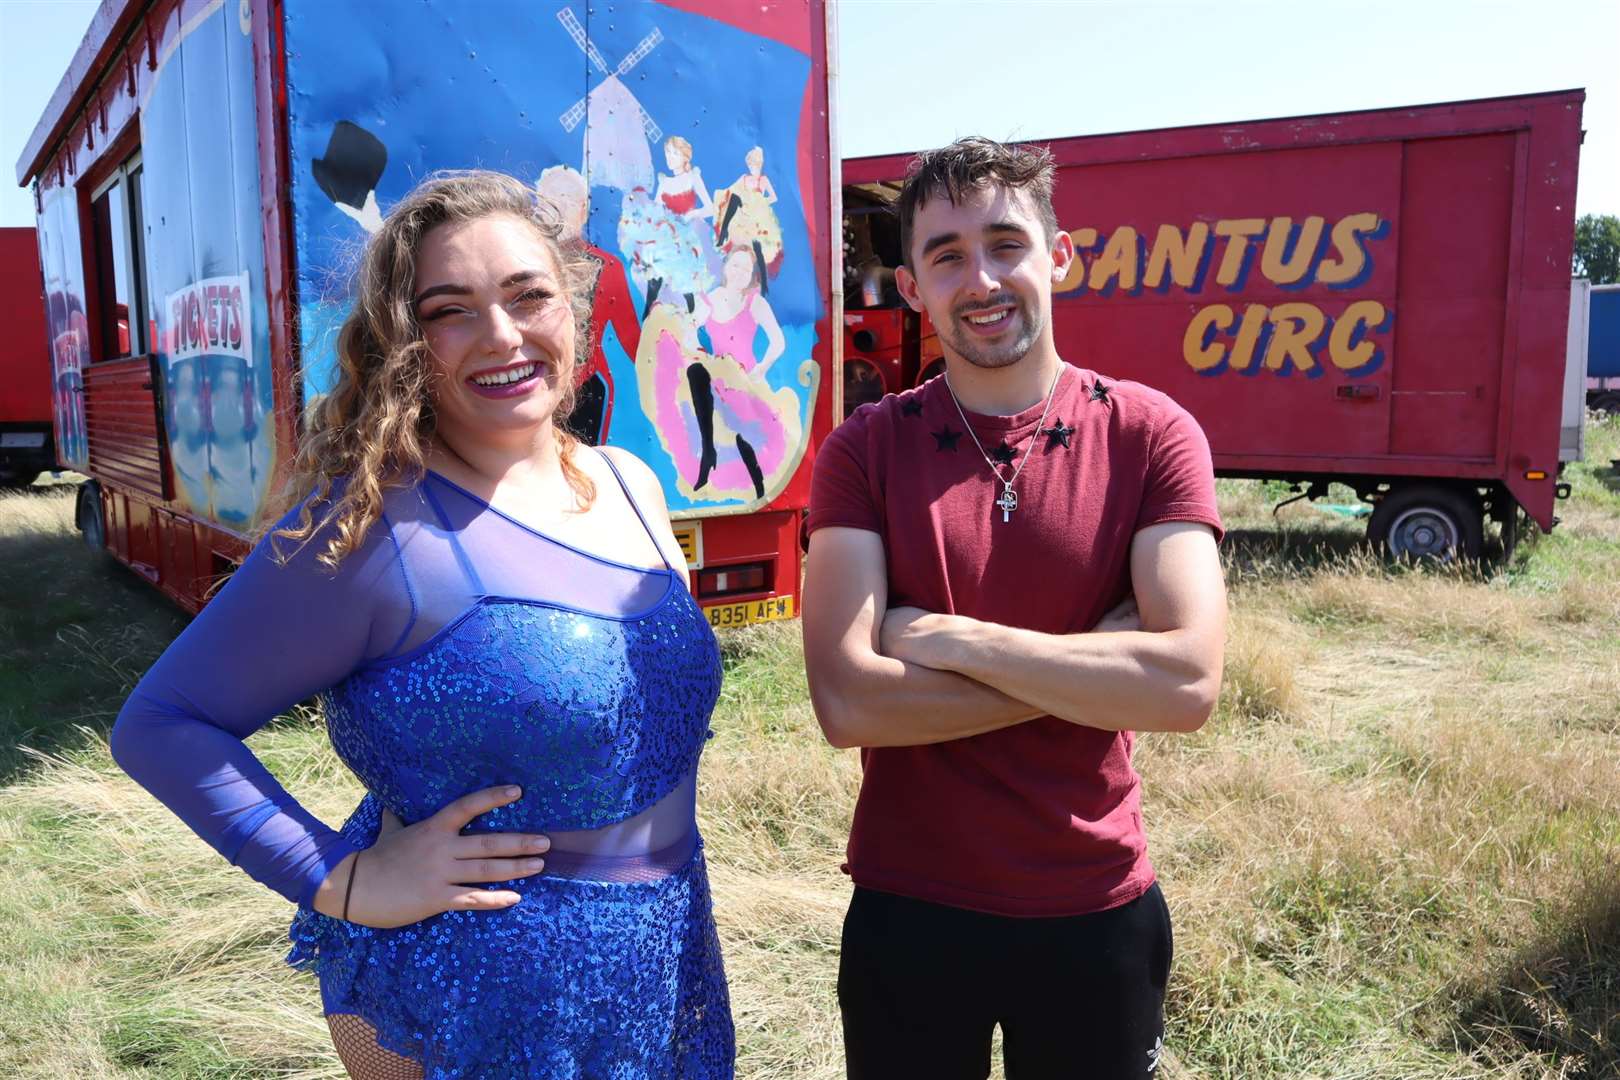 Brother and sister Ruby and Lucien Santus prepare to get Santus Circus back on the road after the coronavirus lockdown